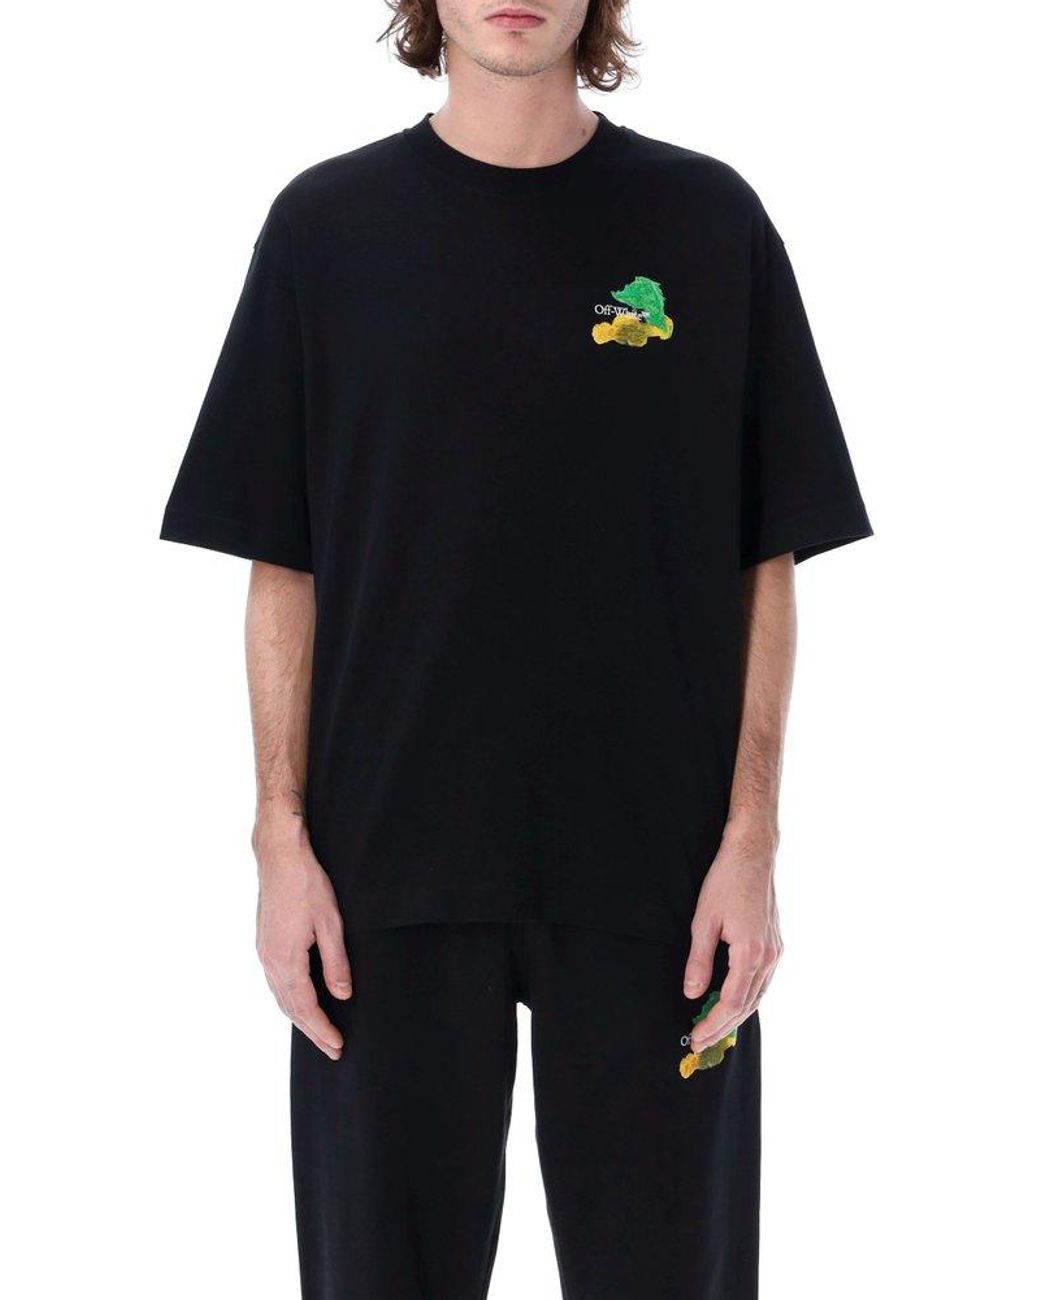 Off-White Brush Arr Over Skate S/S T-Shirt Black | Hype Vault Kuala Lumpur | Asia's Top Trusted High-End Sneakers and Streetwear Store